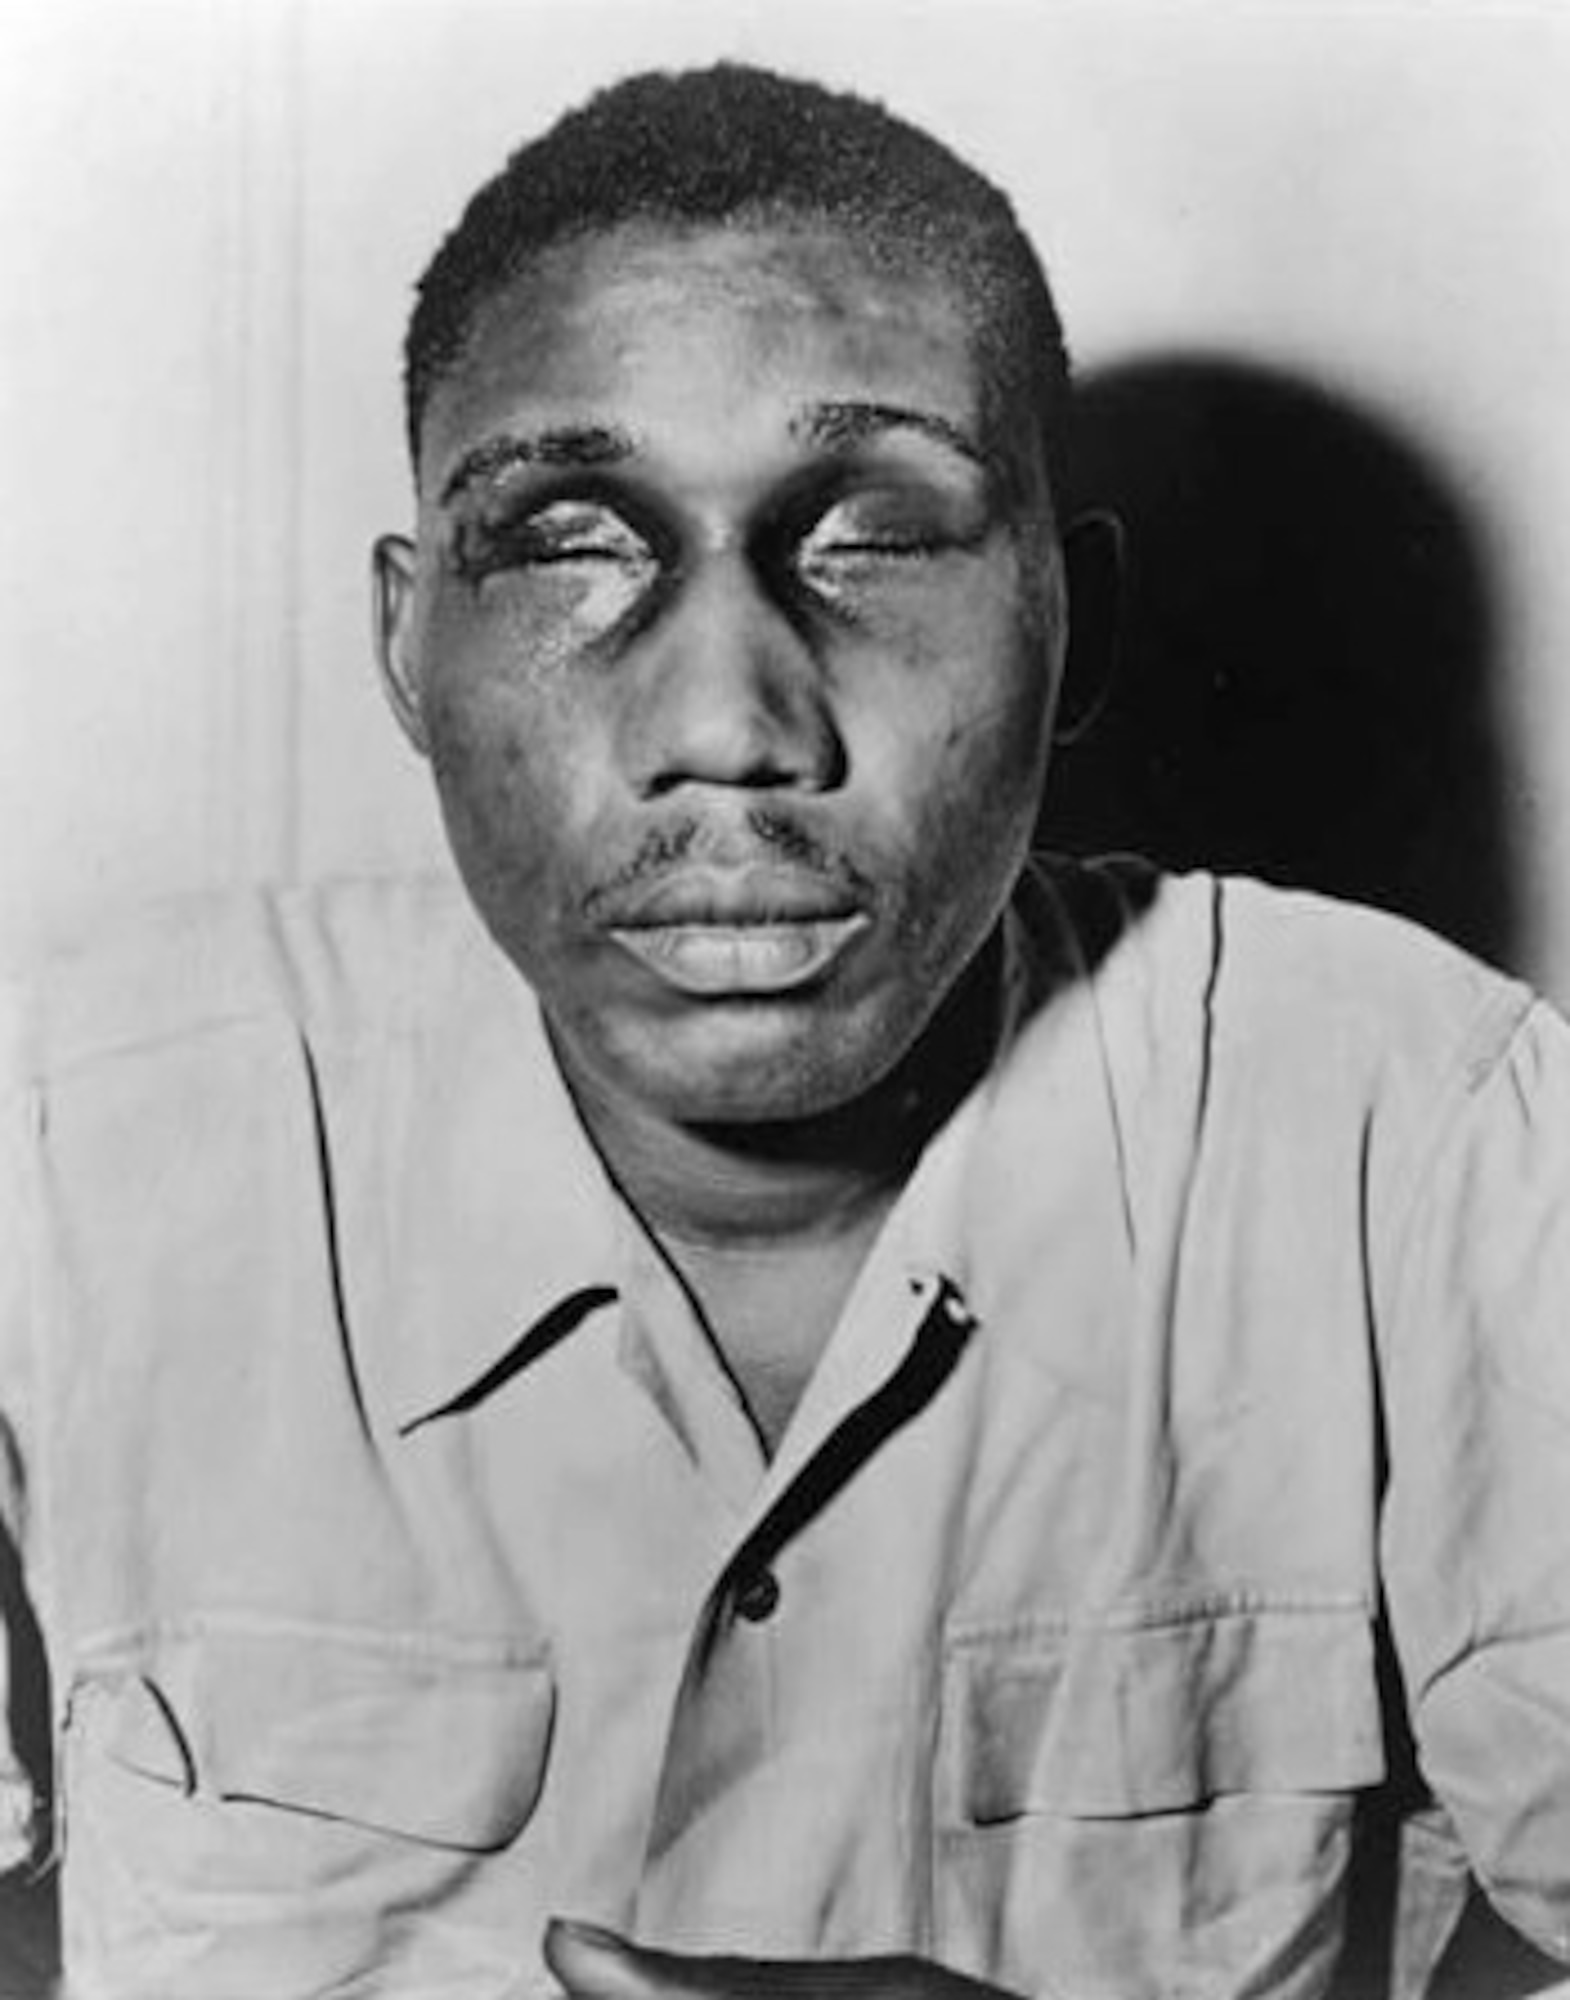 Sergeant Isaac Woodard, Jr. was returning home after receiving an honorable discharge. He was a decorated war veteran and was still wearing his service uniform when the police chief drove a nightstick into his eyes